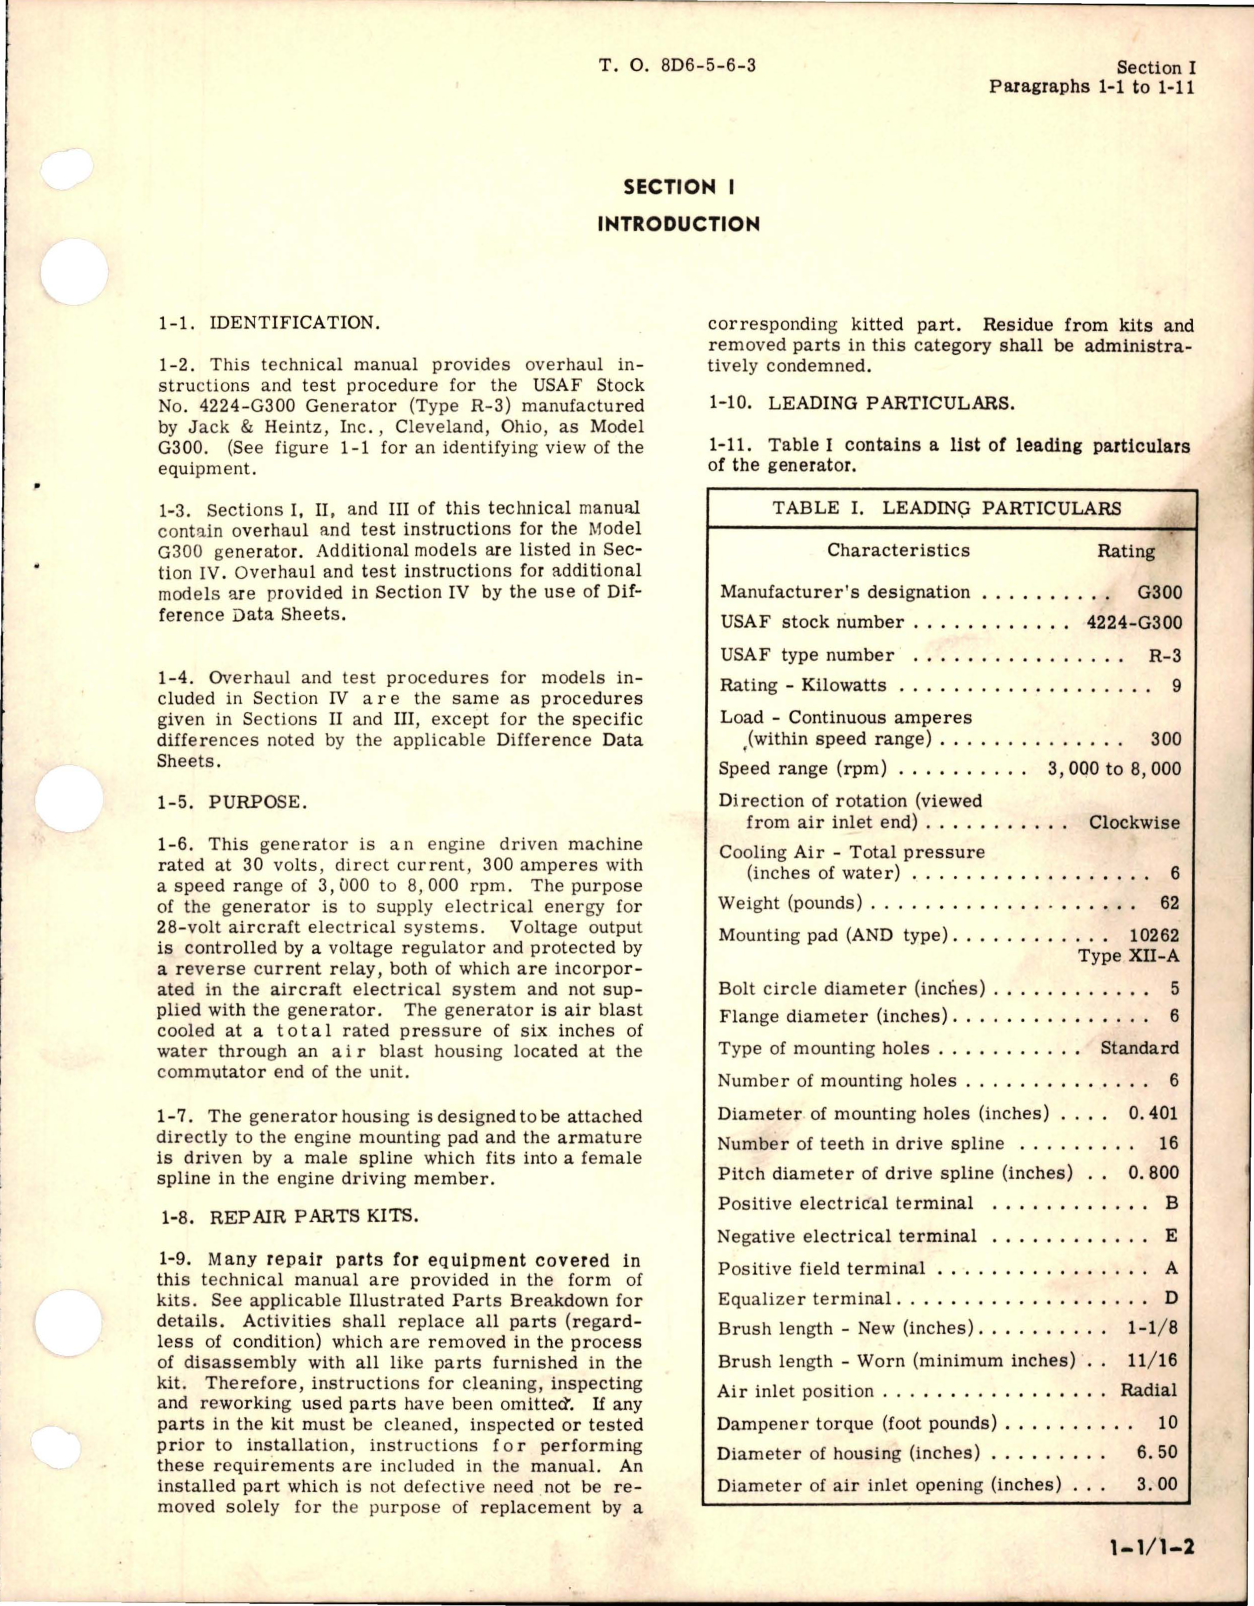 Sample page 7 from AirCorps Library document: Overhaul Manual for Generator 